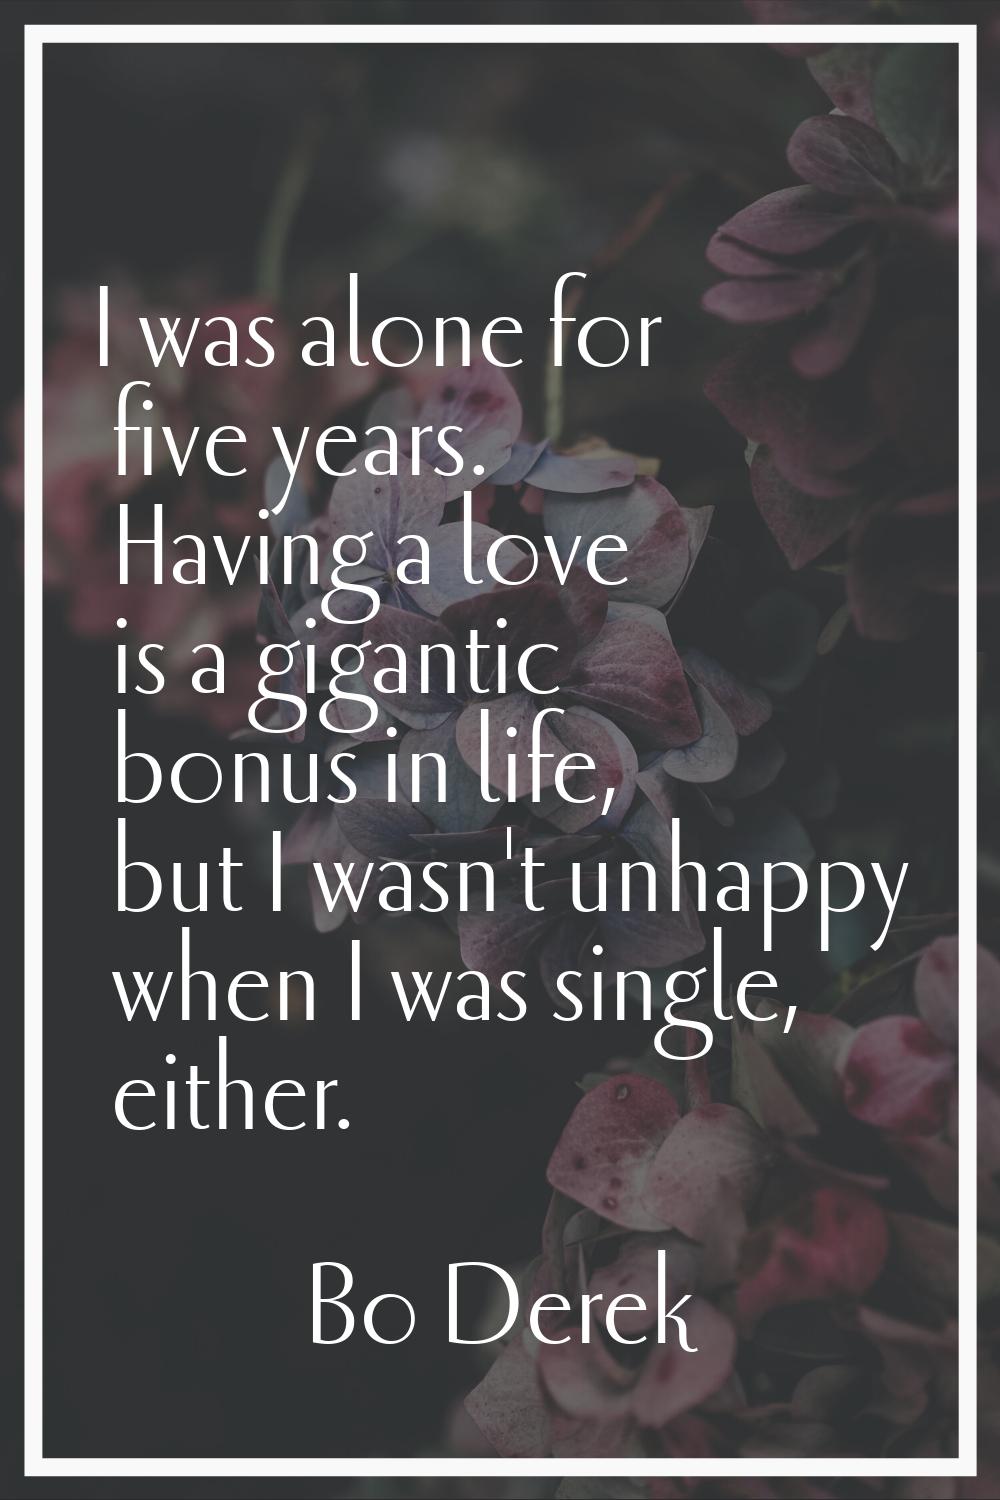 I was alone for five years. Having a love is a gigantic bonus in life, but I wasn't unhappy when I 